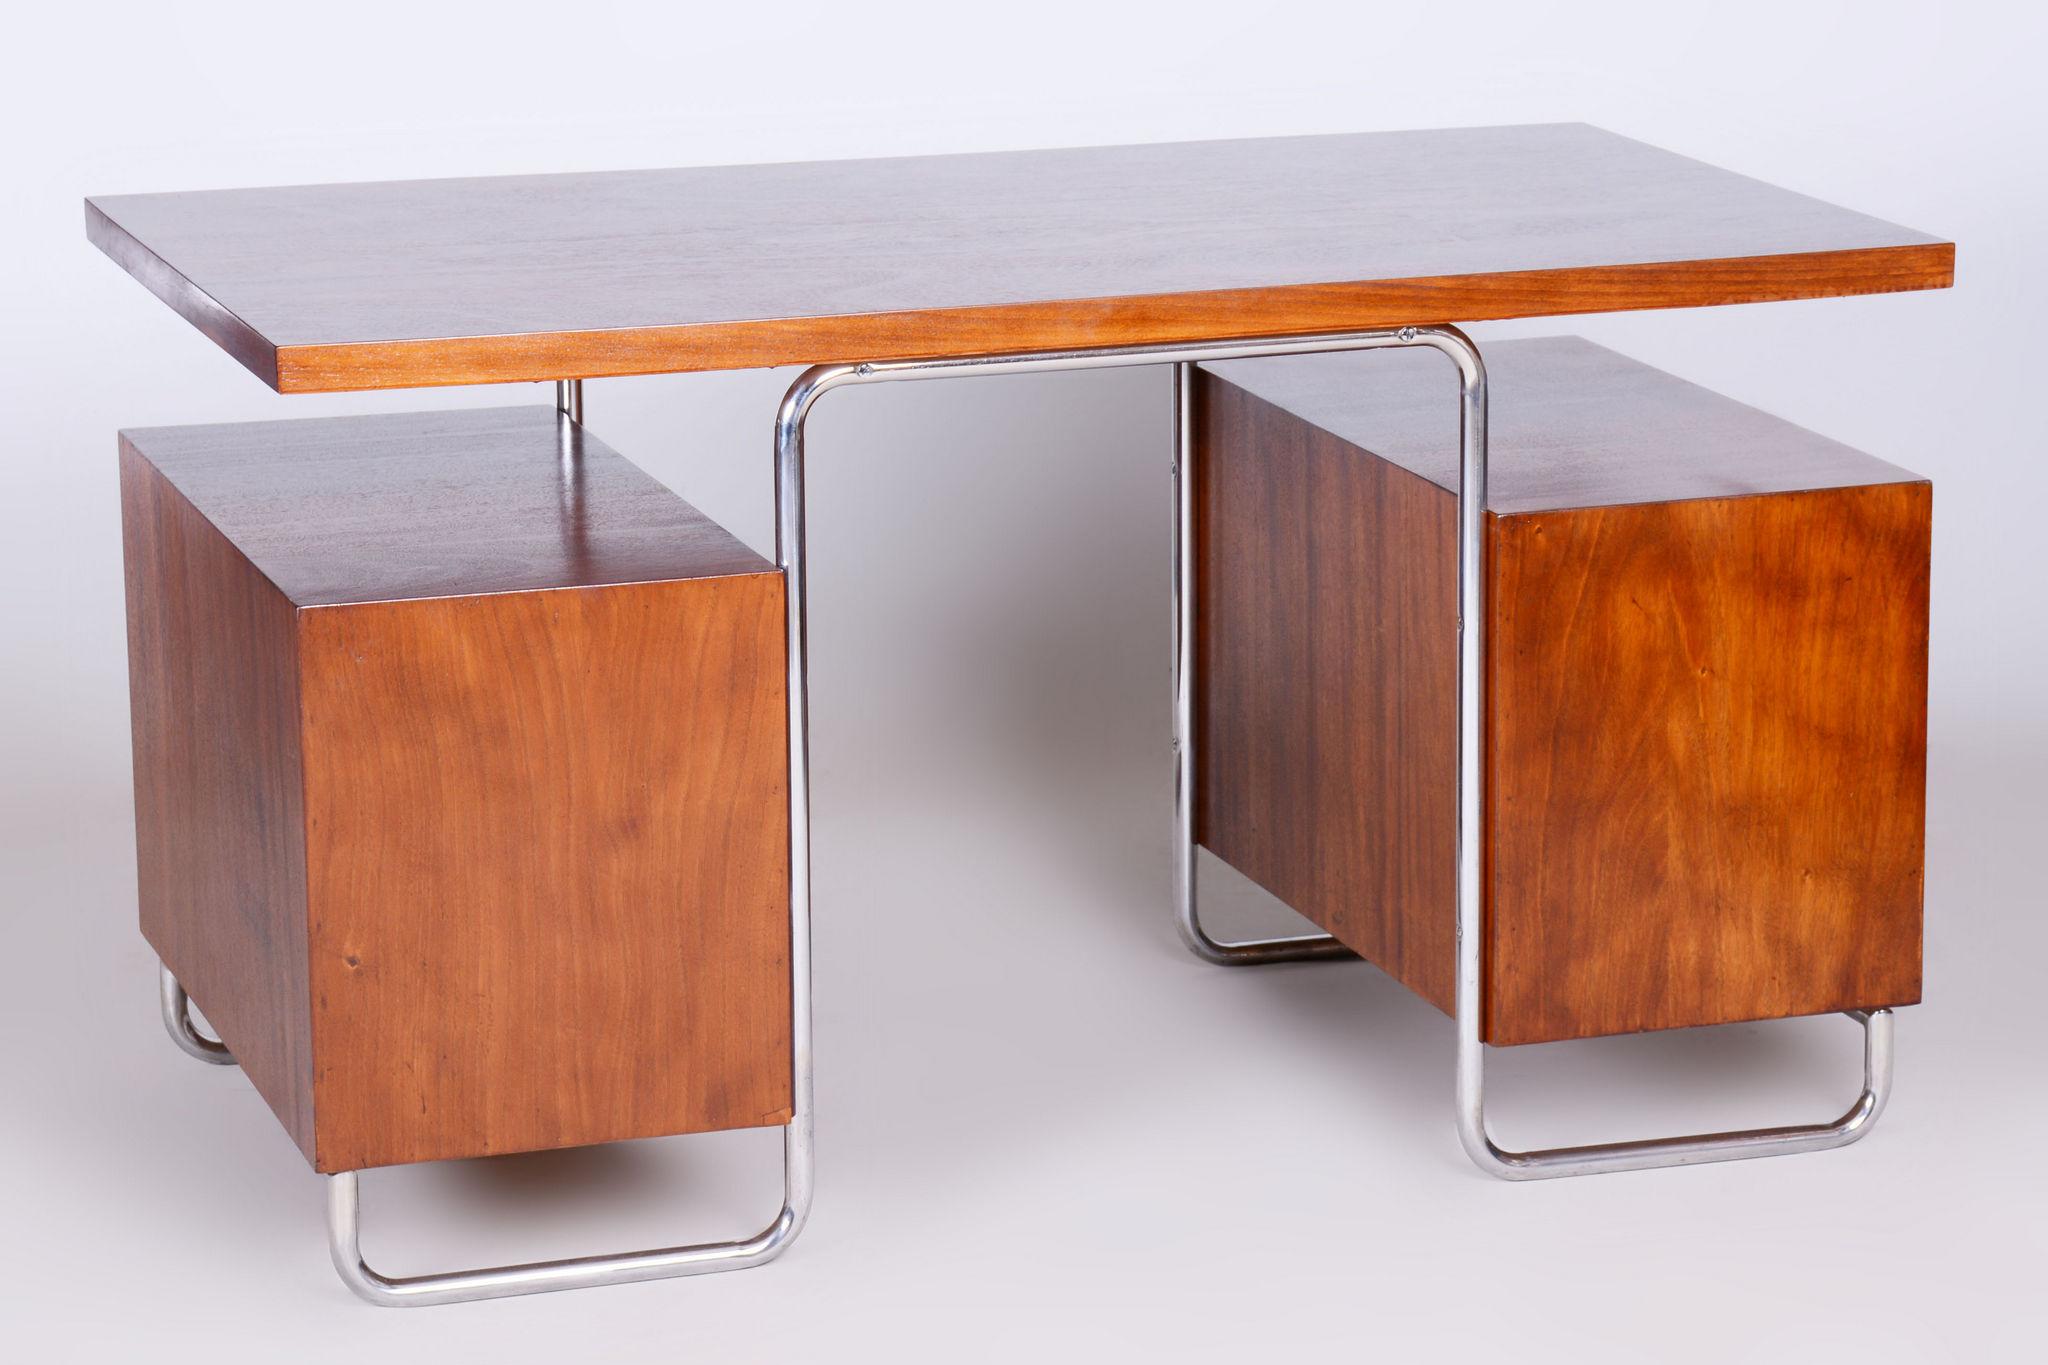 Restored Bauhaus Beech Writing Desk Made by Hynek Gottwald.

Maker: Hynek Gottwald
Material: Beech, Chrome-plated Steel
Source: Czechia 
Period: 1930-1939
Newly varnished wood.
The chrome parts have been cleaned and professionally restored. 

Leg